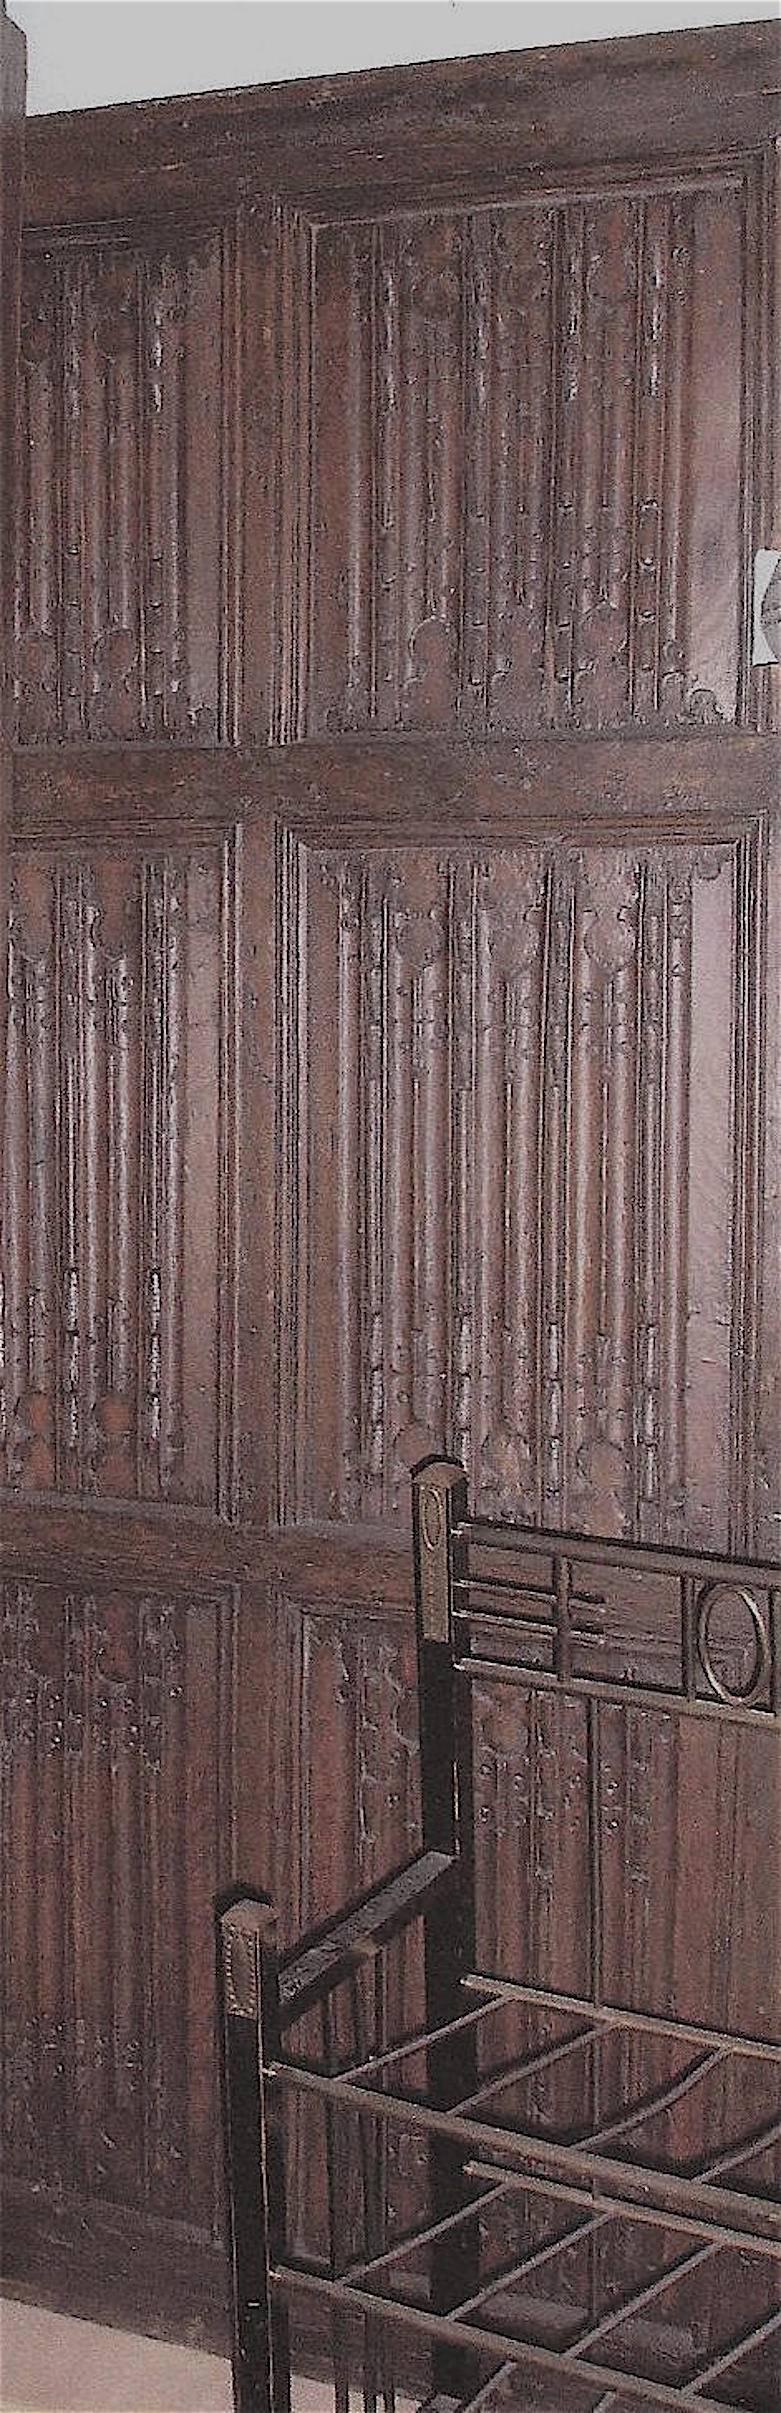 Elizabethan 16th century Oak Tracery Paneling-Historic Provenance -Tycoon William R. Hearst For Sale